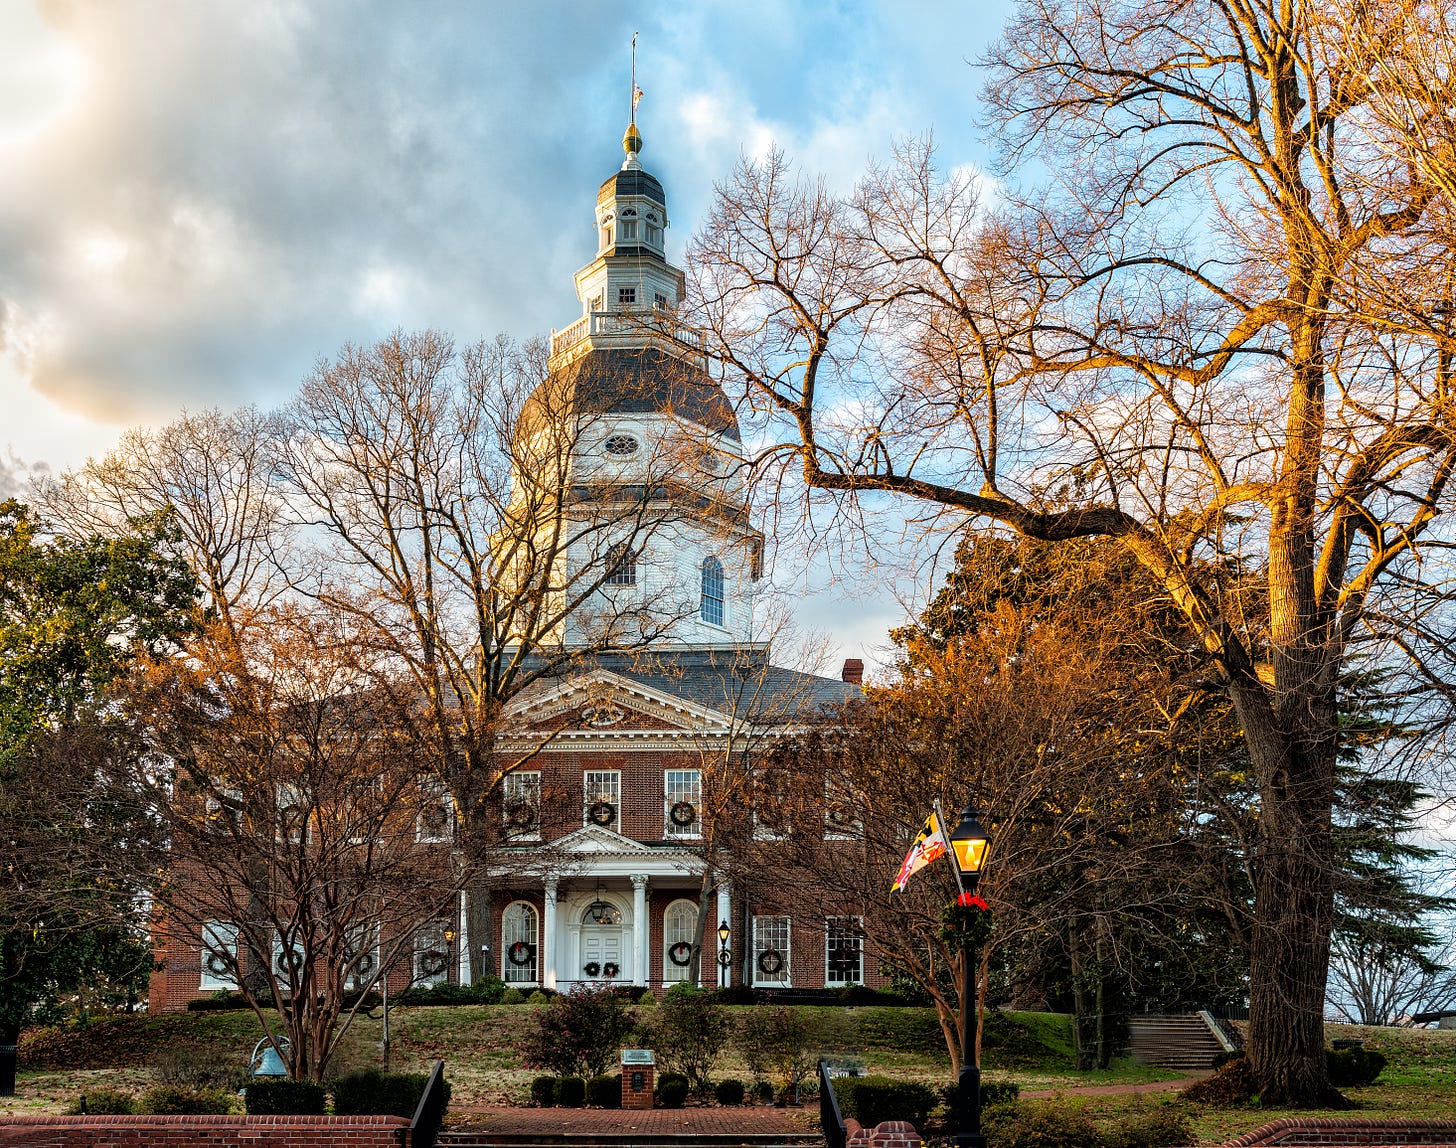 A straight-on view of the Maryland state capitol in Annapolis, Maryland, at Christmas time.